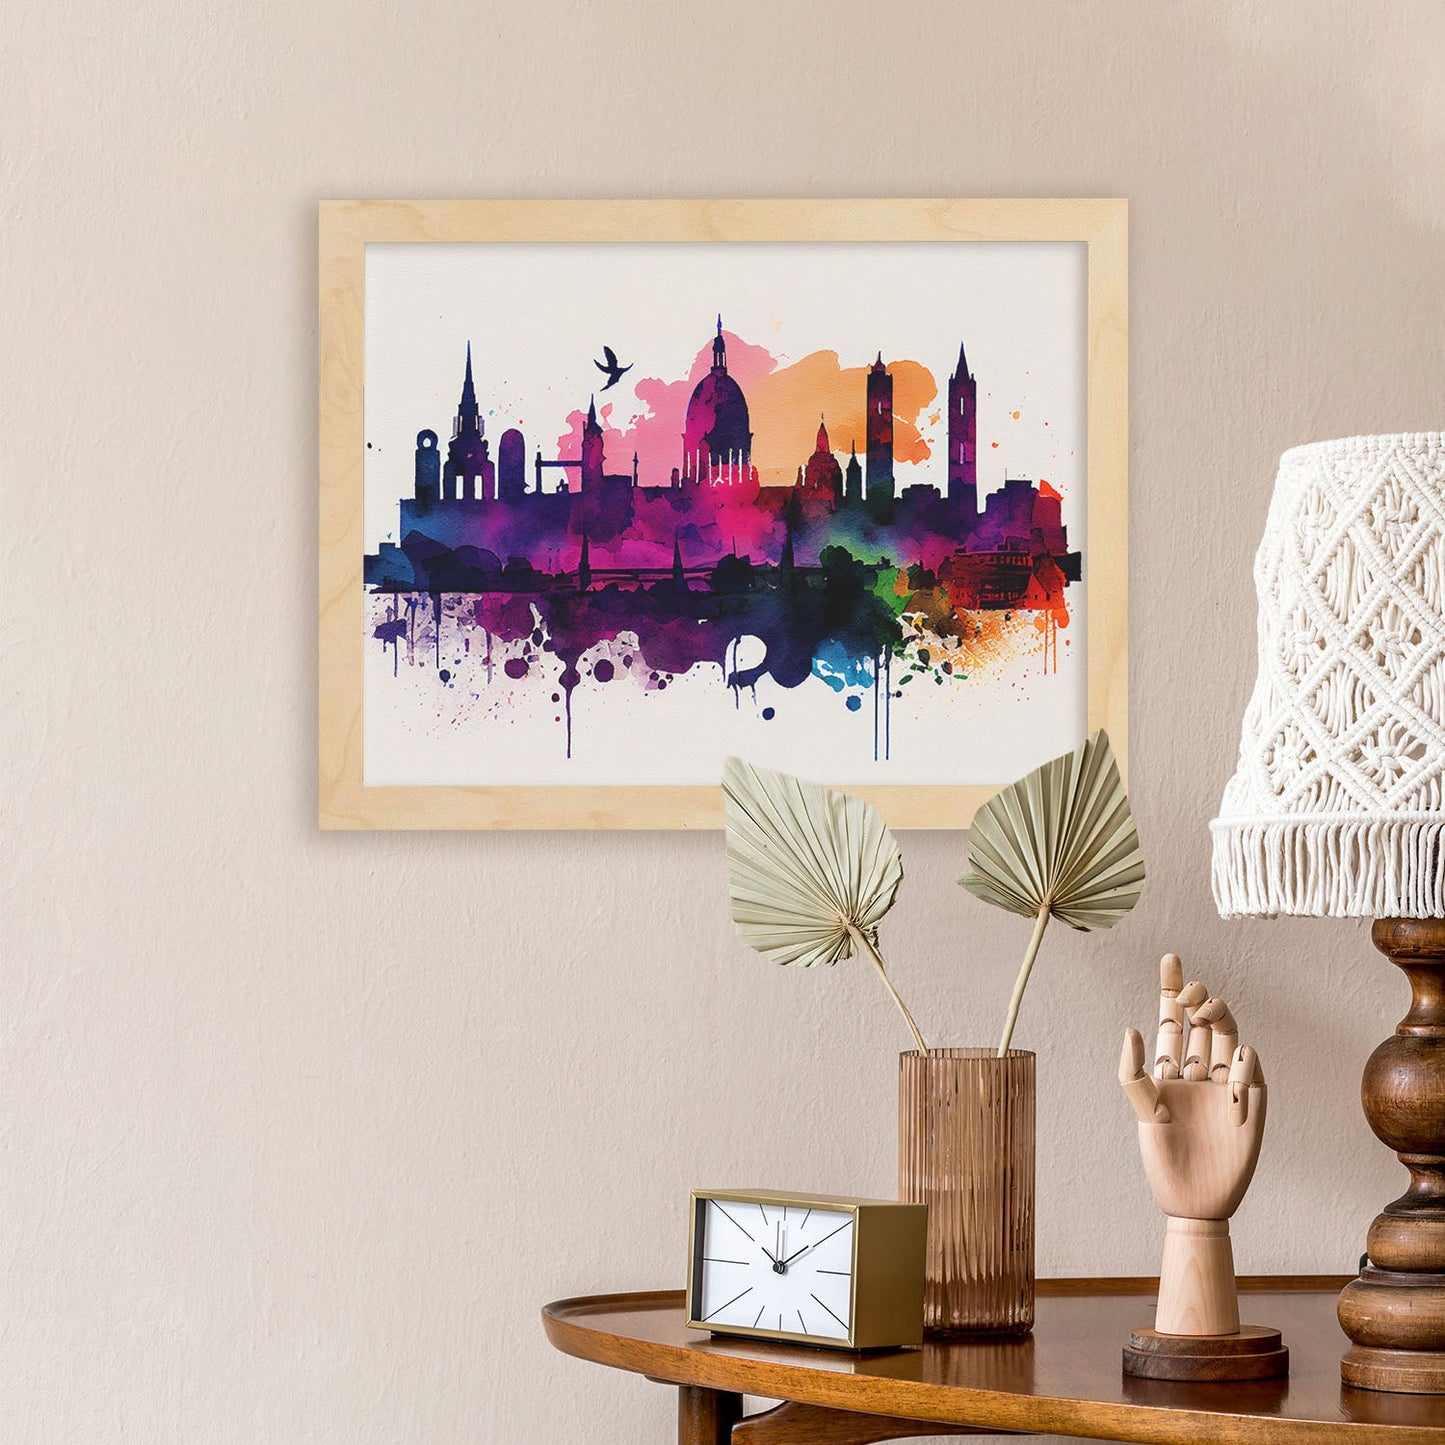 Nacnic watercolor of a skyline of the city of Dublin. Aesthetic Wall Art Prints for Bedroom or Living Room Design.